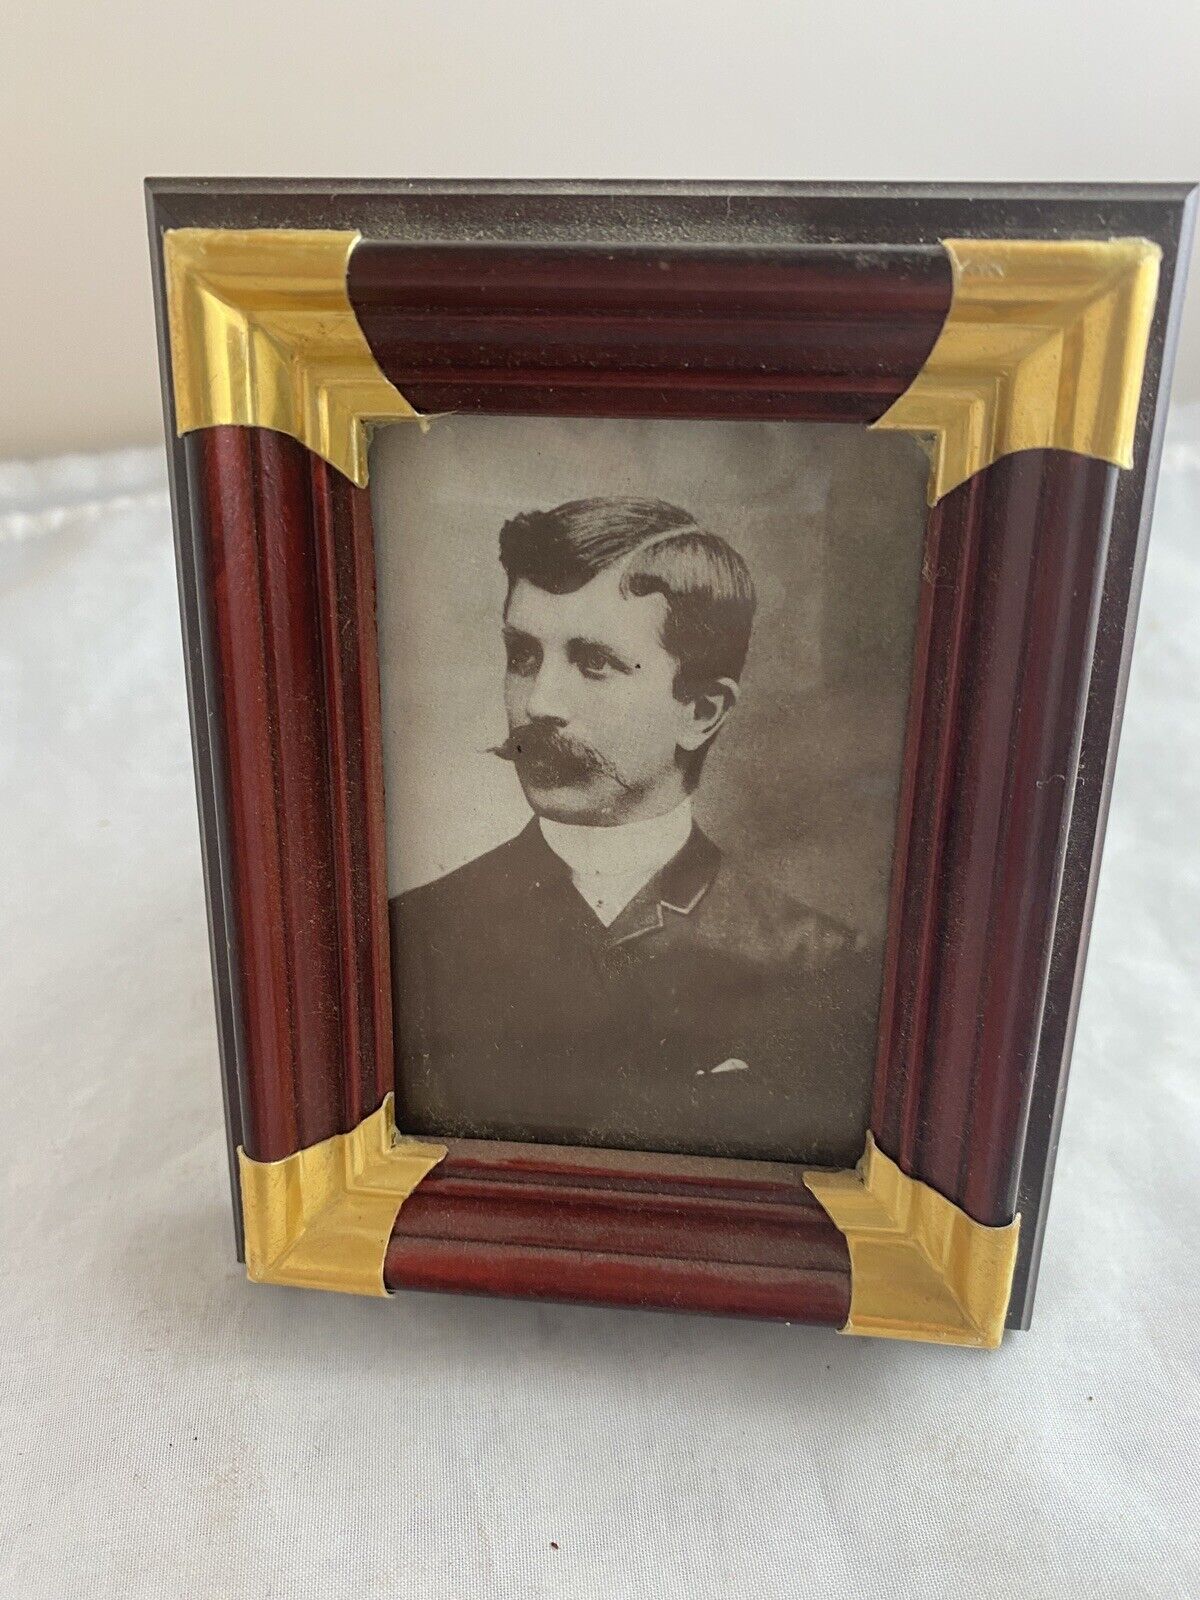 Antique 1900’s Man\'s Portrait in Cherry Wood & Gold Painted 4x3 Frame.